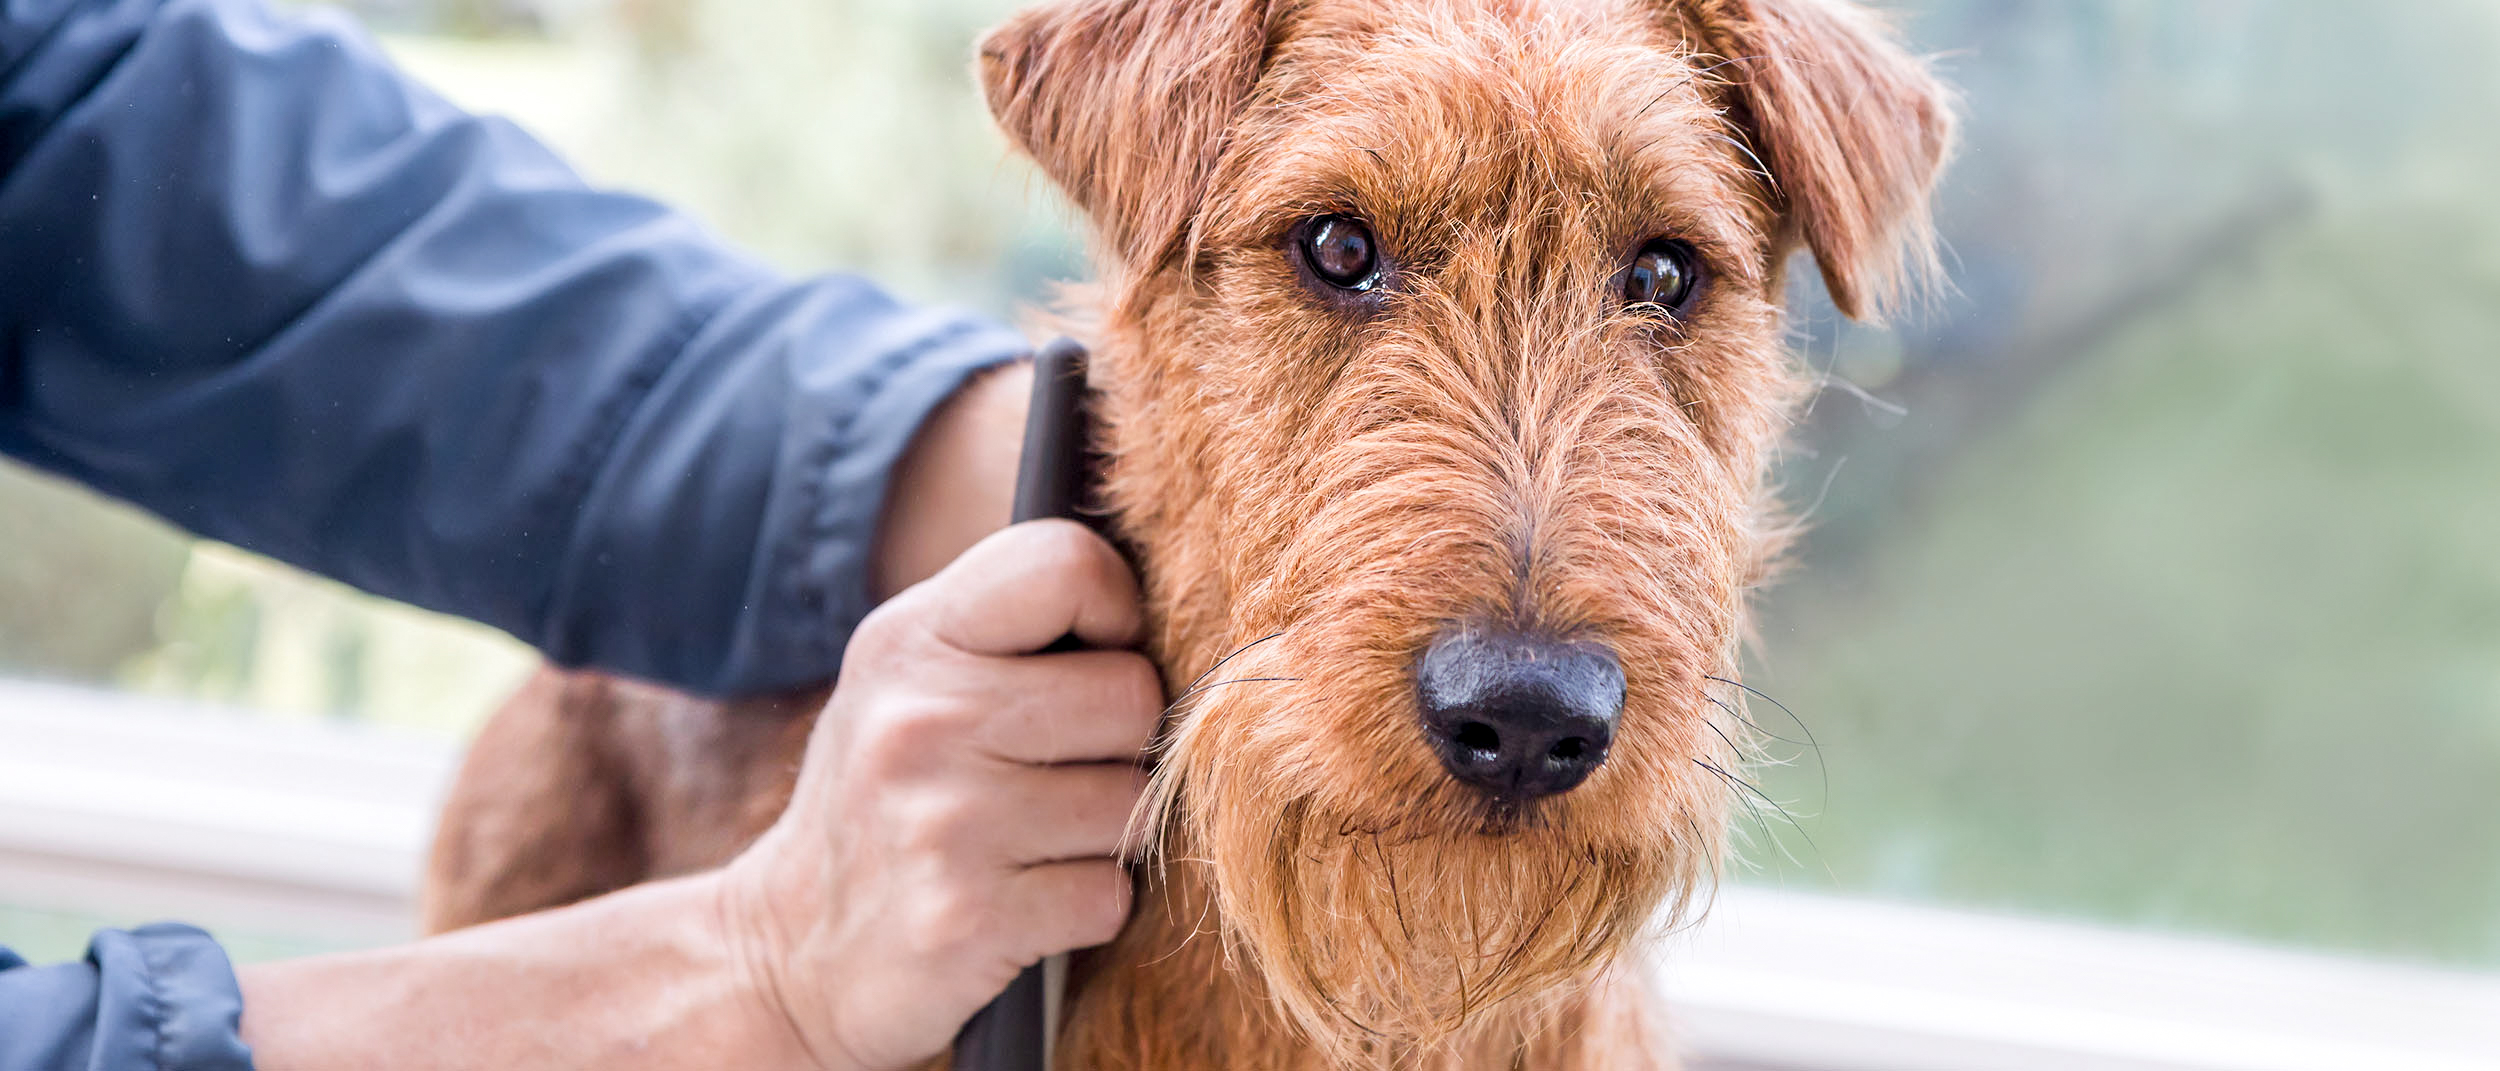 Adult Irish Terrier lying down by a window being brushed.